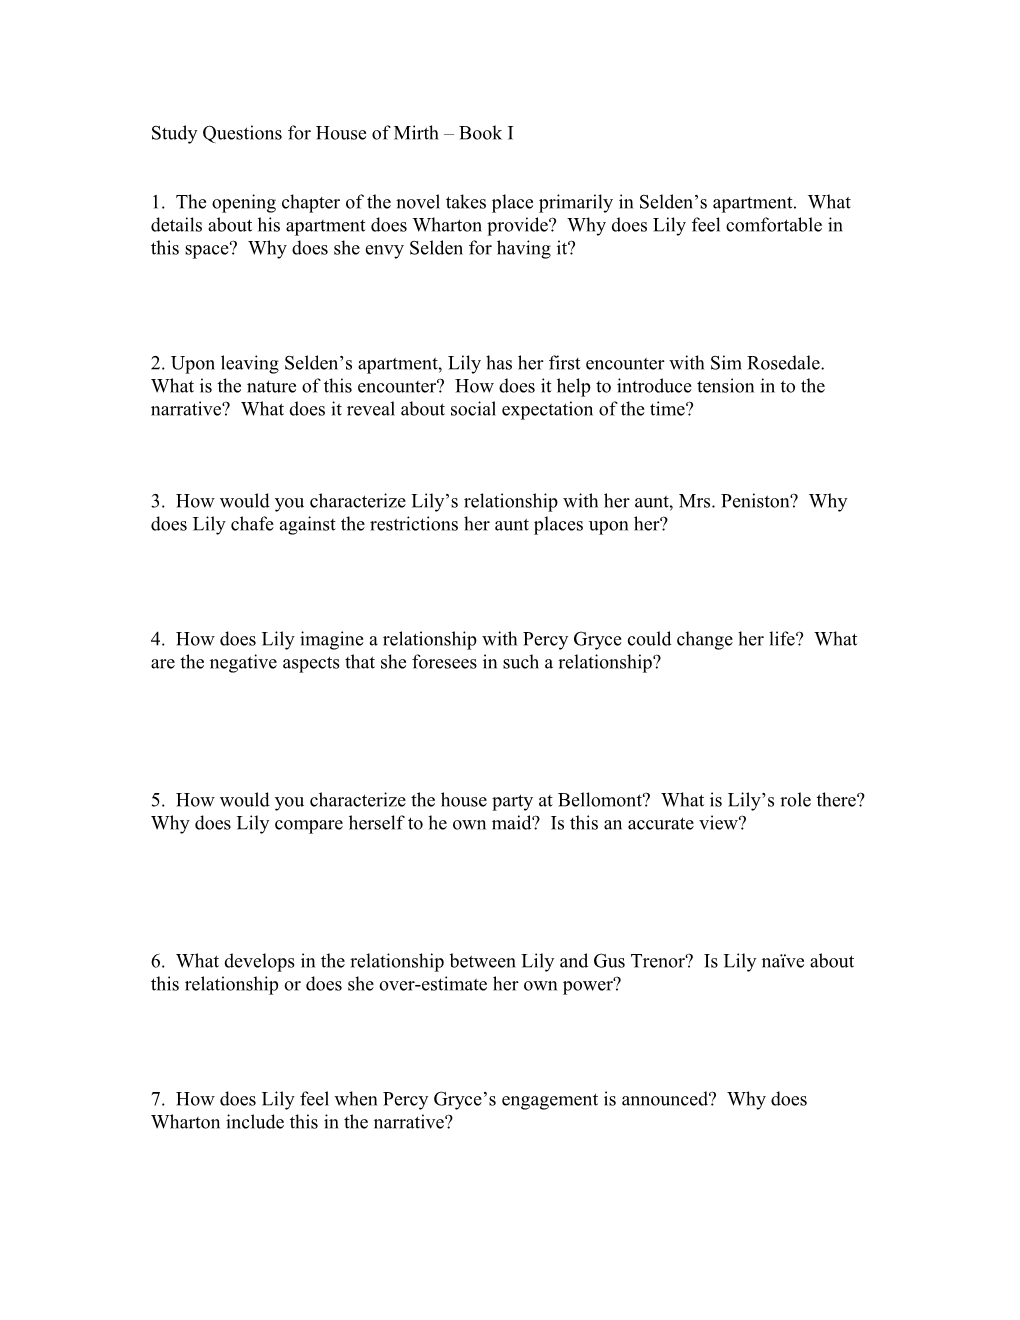 Study Questions for House of Mirth Book I